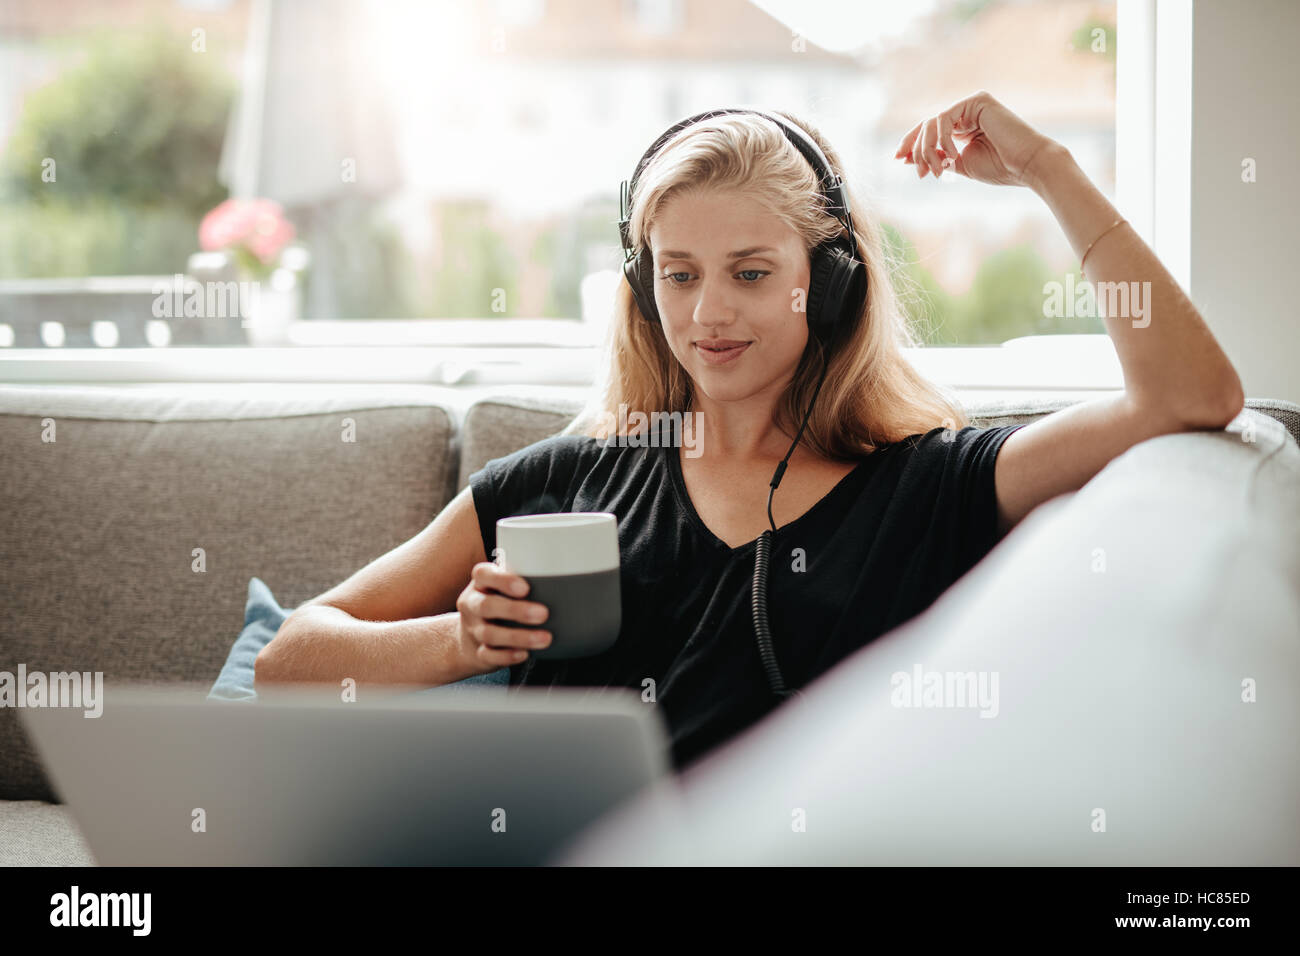 Beautiful young woman with headphones holding a cup of coffee and looking at laptop. Female sitting on couch in living room at home. Stock Photo